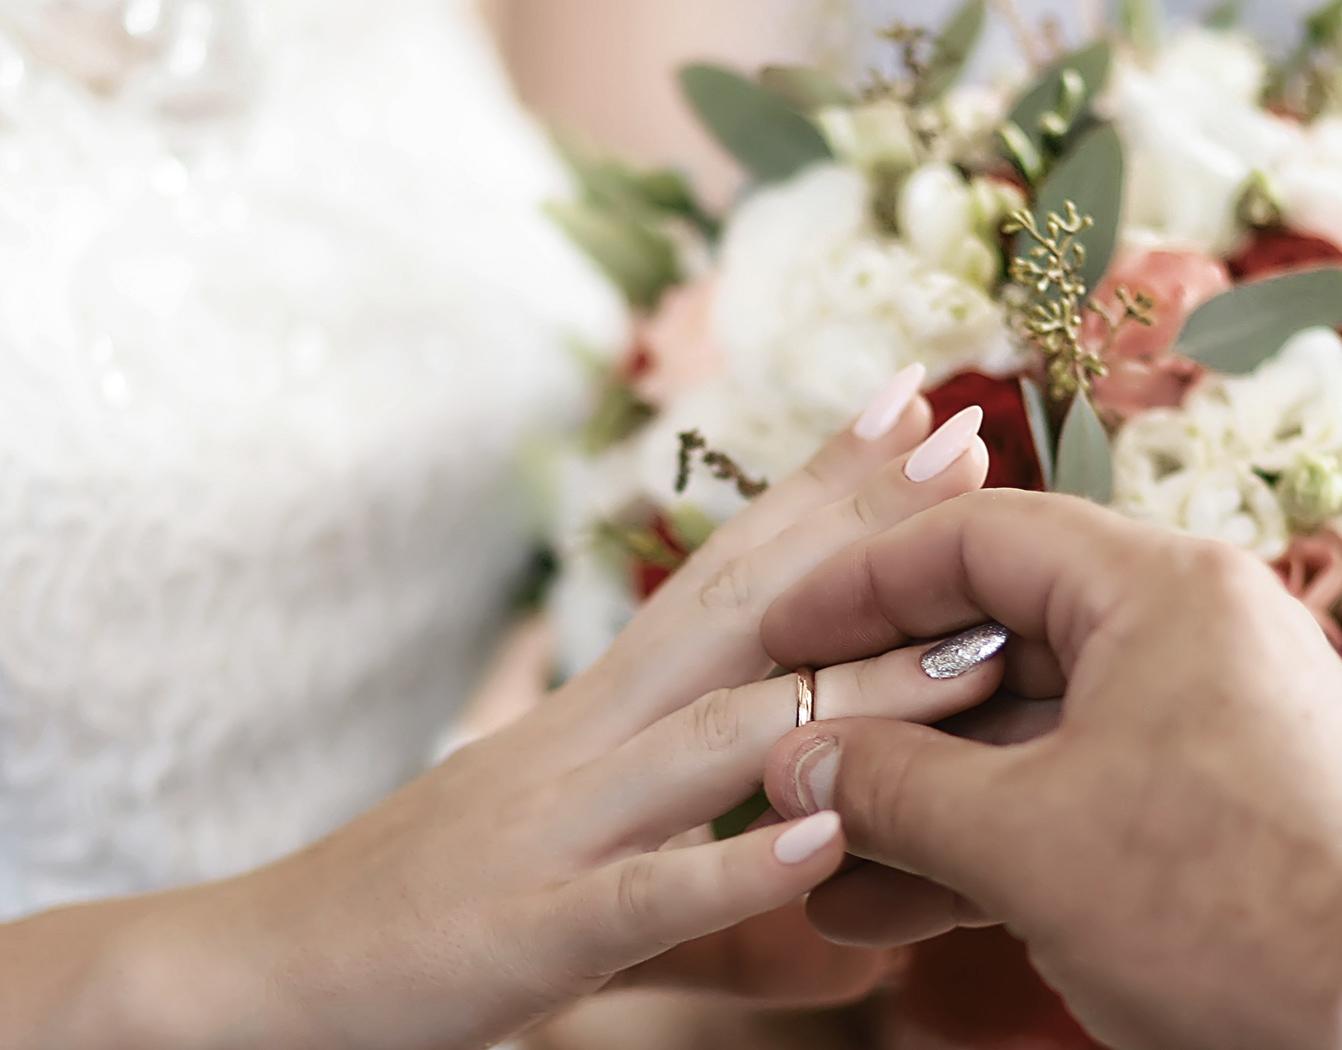 10 tips to make your wedding ring shopping hassle-free.